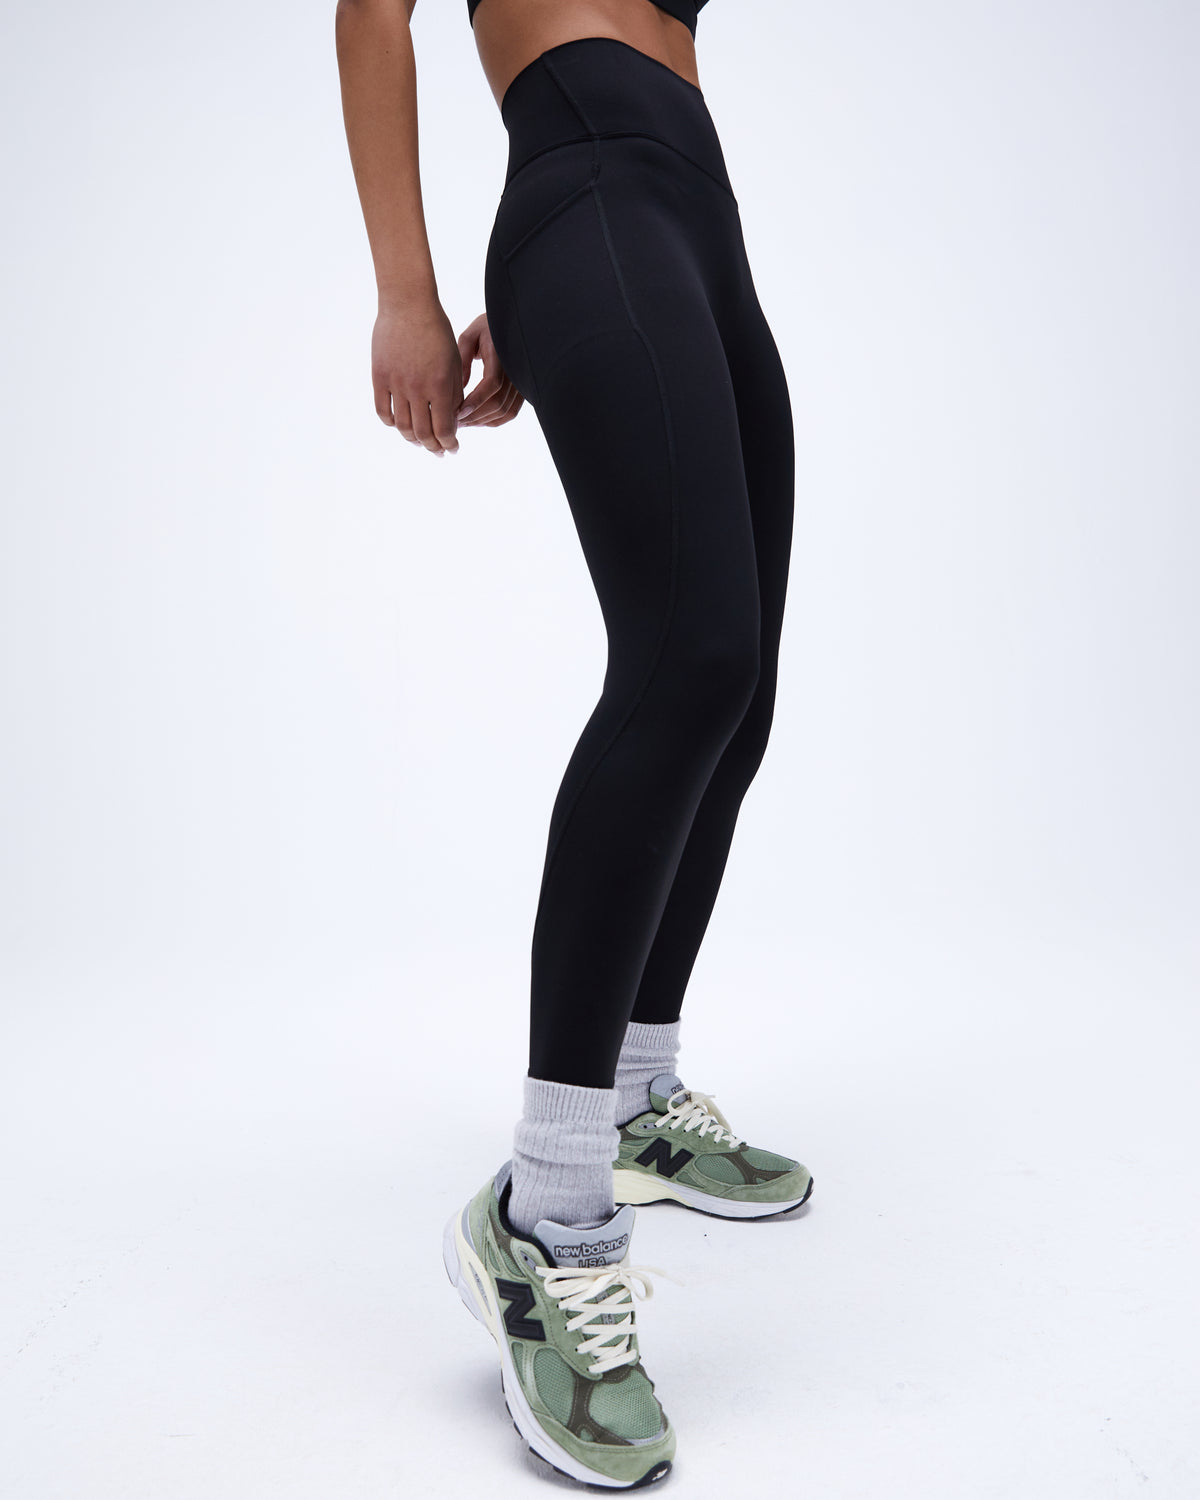 Titika Azalea Pocketed Leggings B XL buy in United States with free  shipping CosmoStore